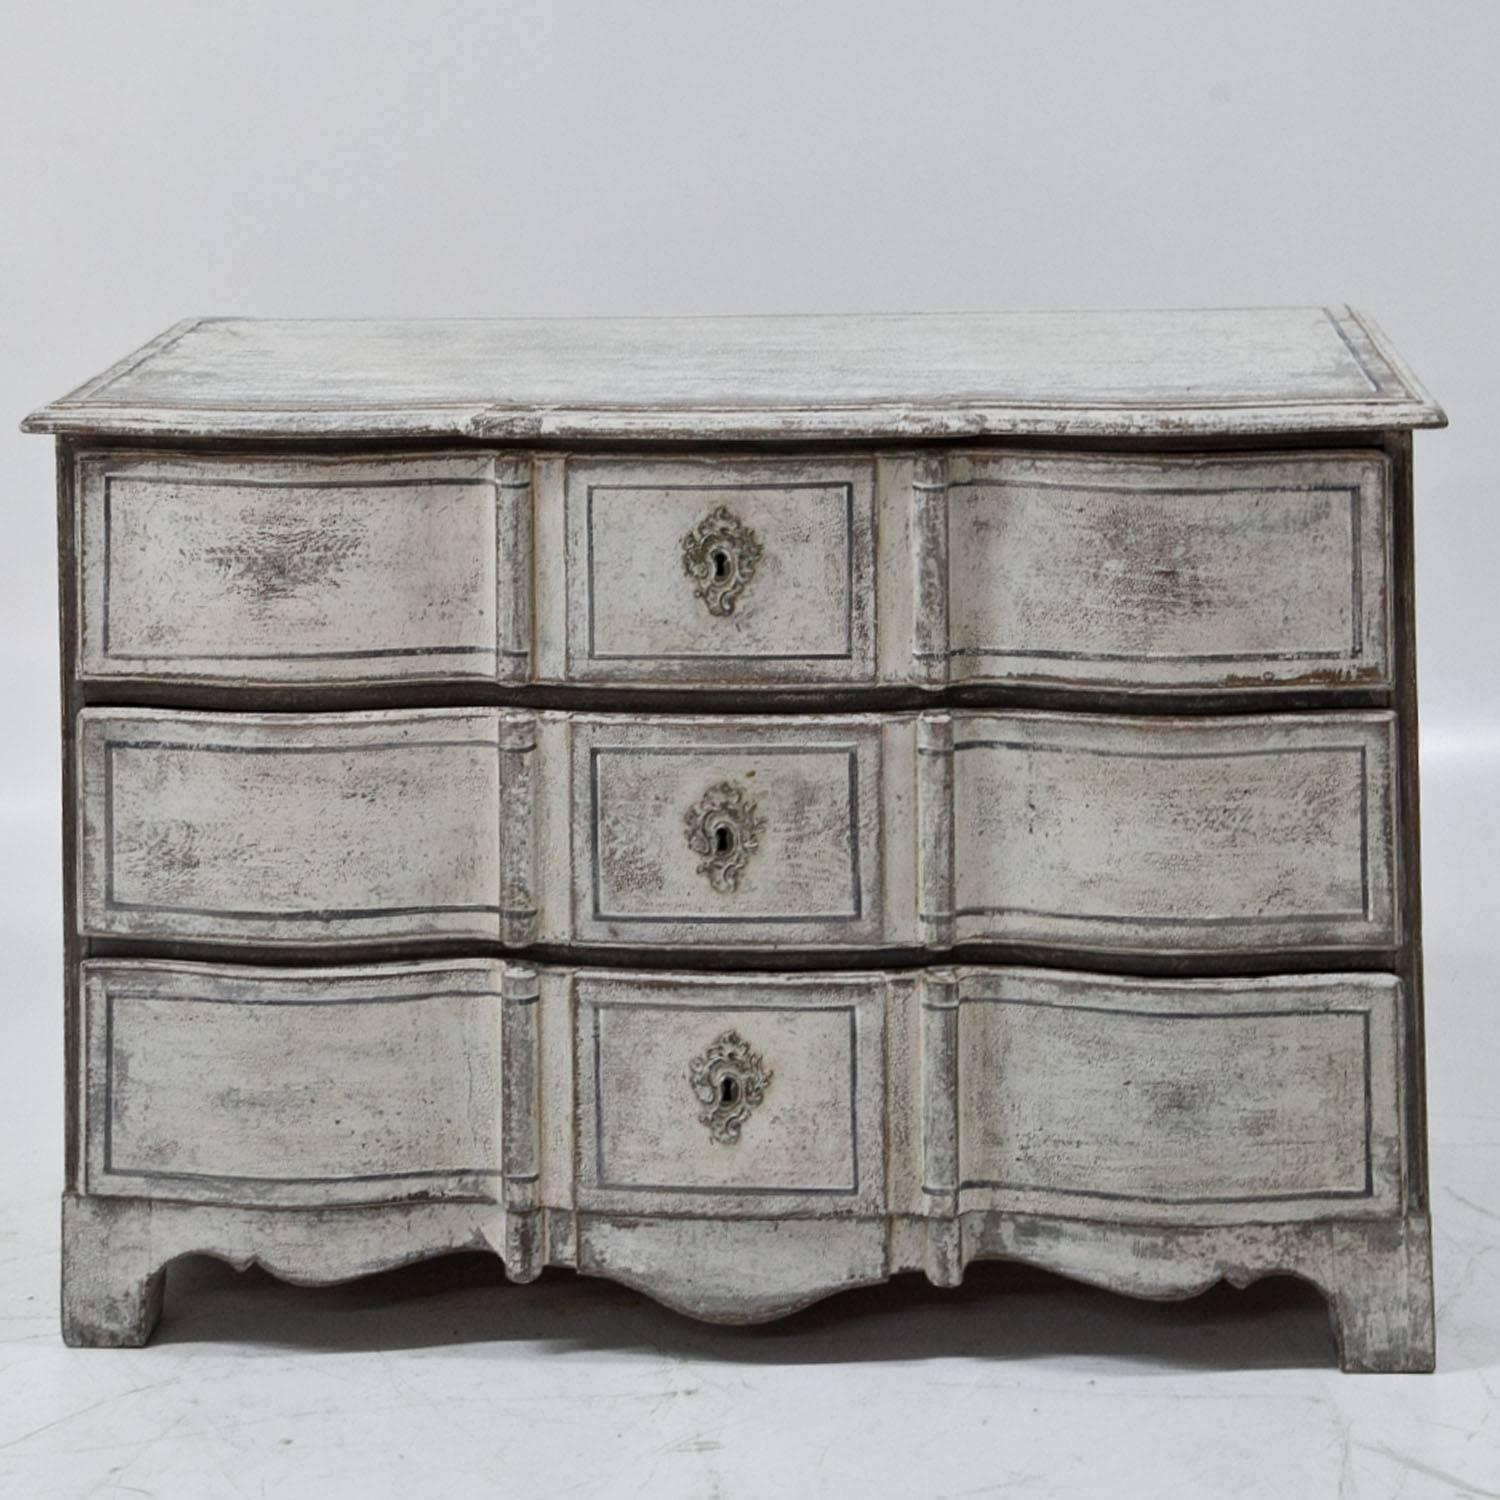 Three-drawered Baroque chest of drawers with a wavy skirt and a serpentine front. The white paint with grey accents is new and has a shabby-chic patina.